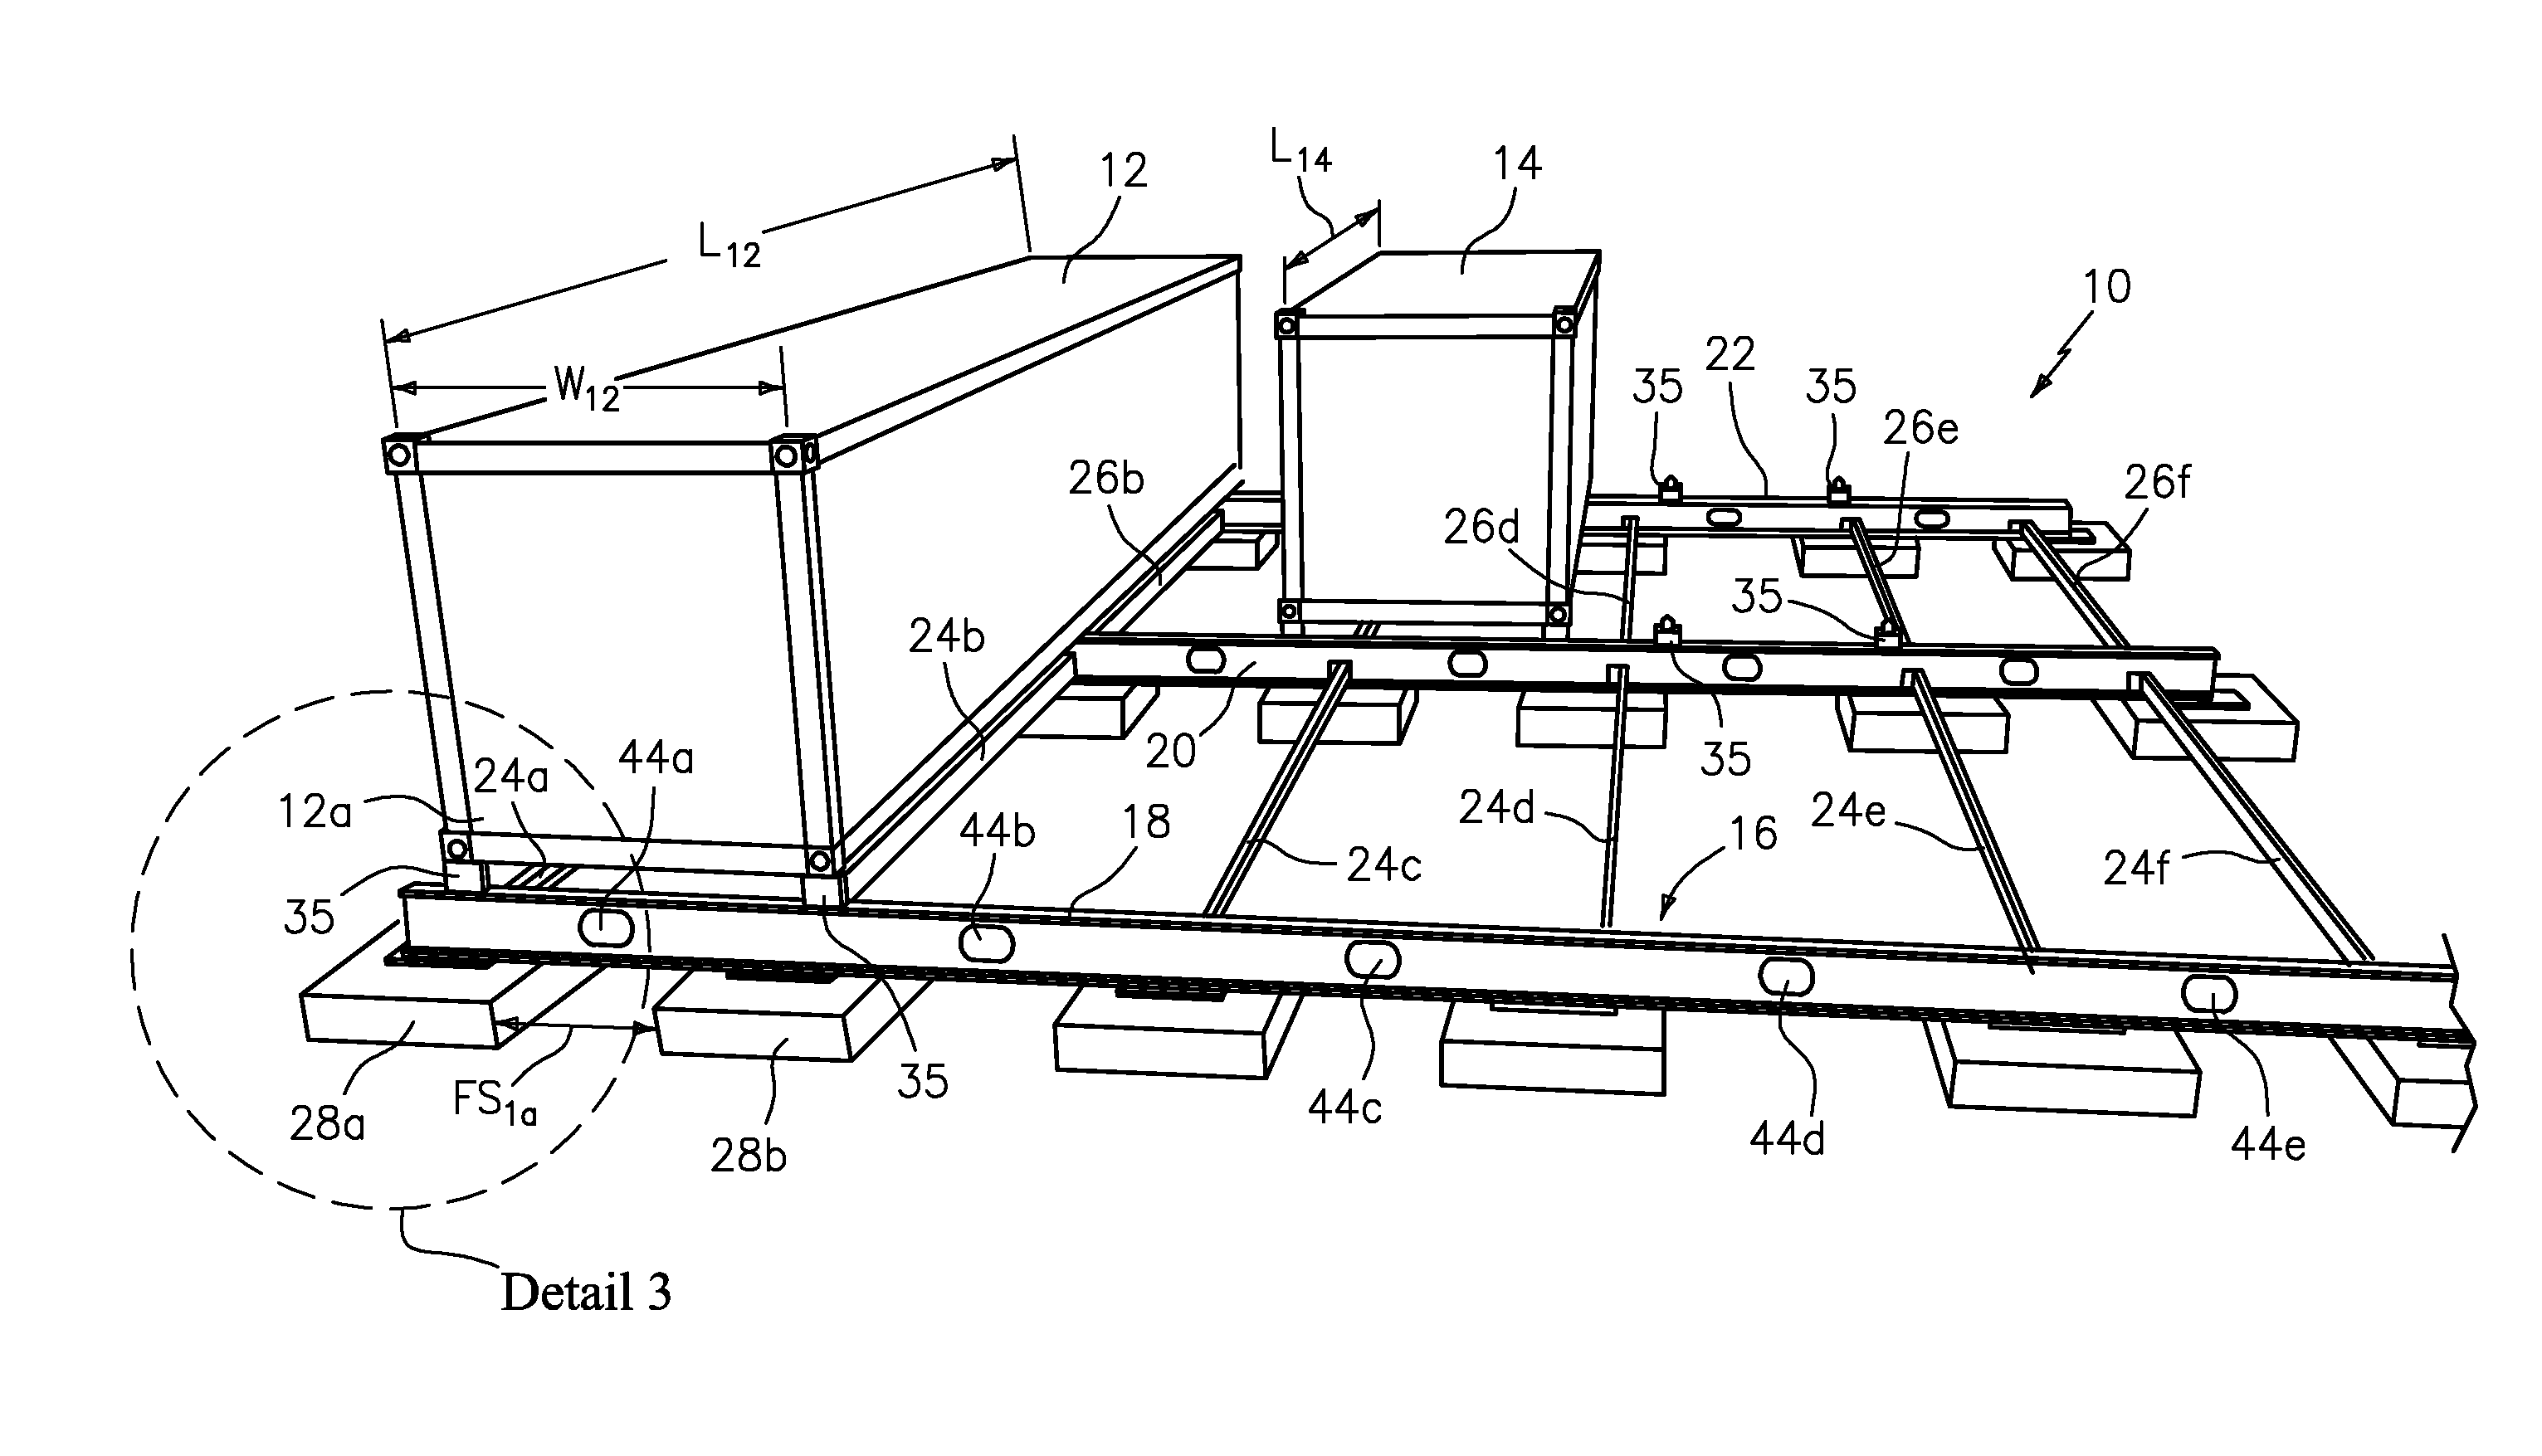 Frames for supporting service cells